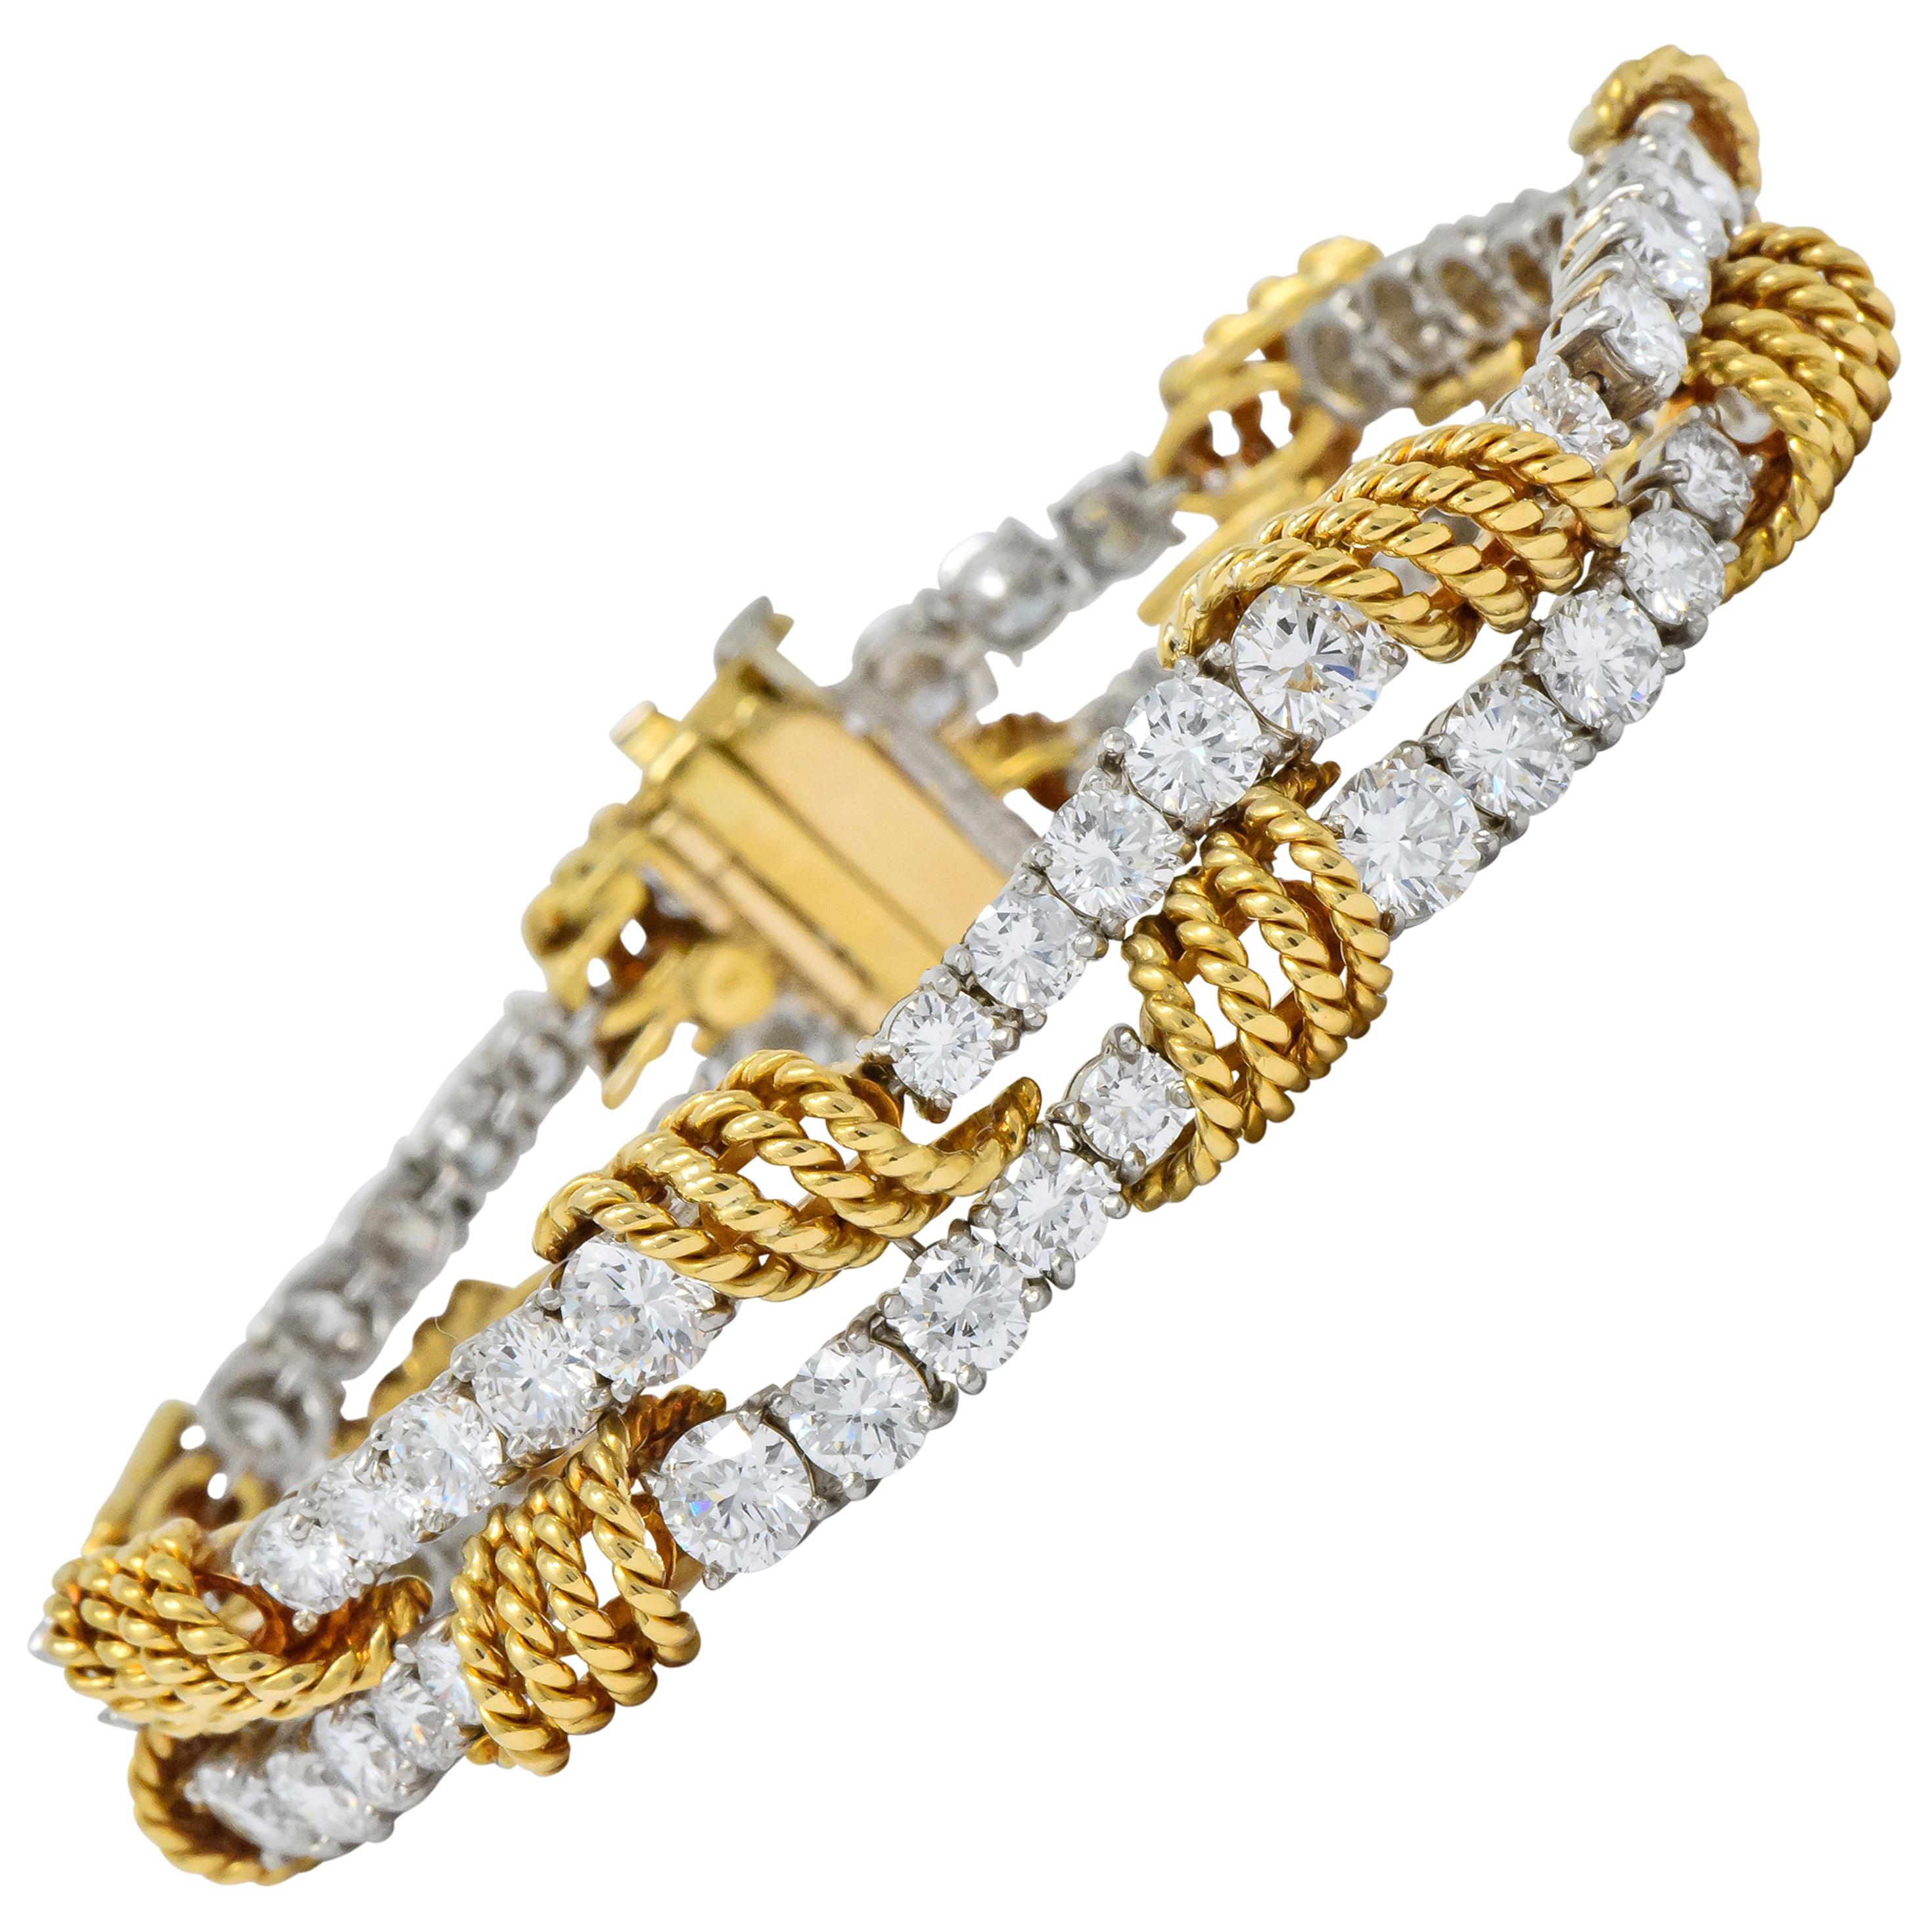 Featuring two rows of basket set, round brilliant cut diamonds weighing approximately 14.00 carats total, G/H color and VVS clarity

Diamonds set in platinum, graduating in size with wrapped twisted gold rope detail

Completed by a concealed clasp